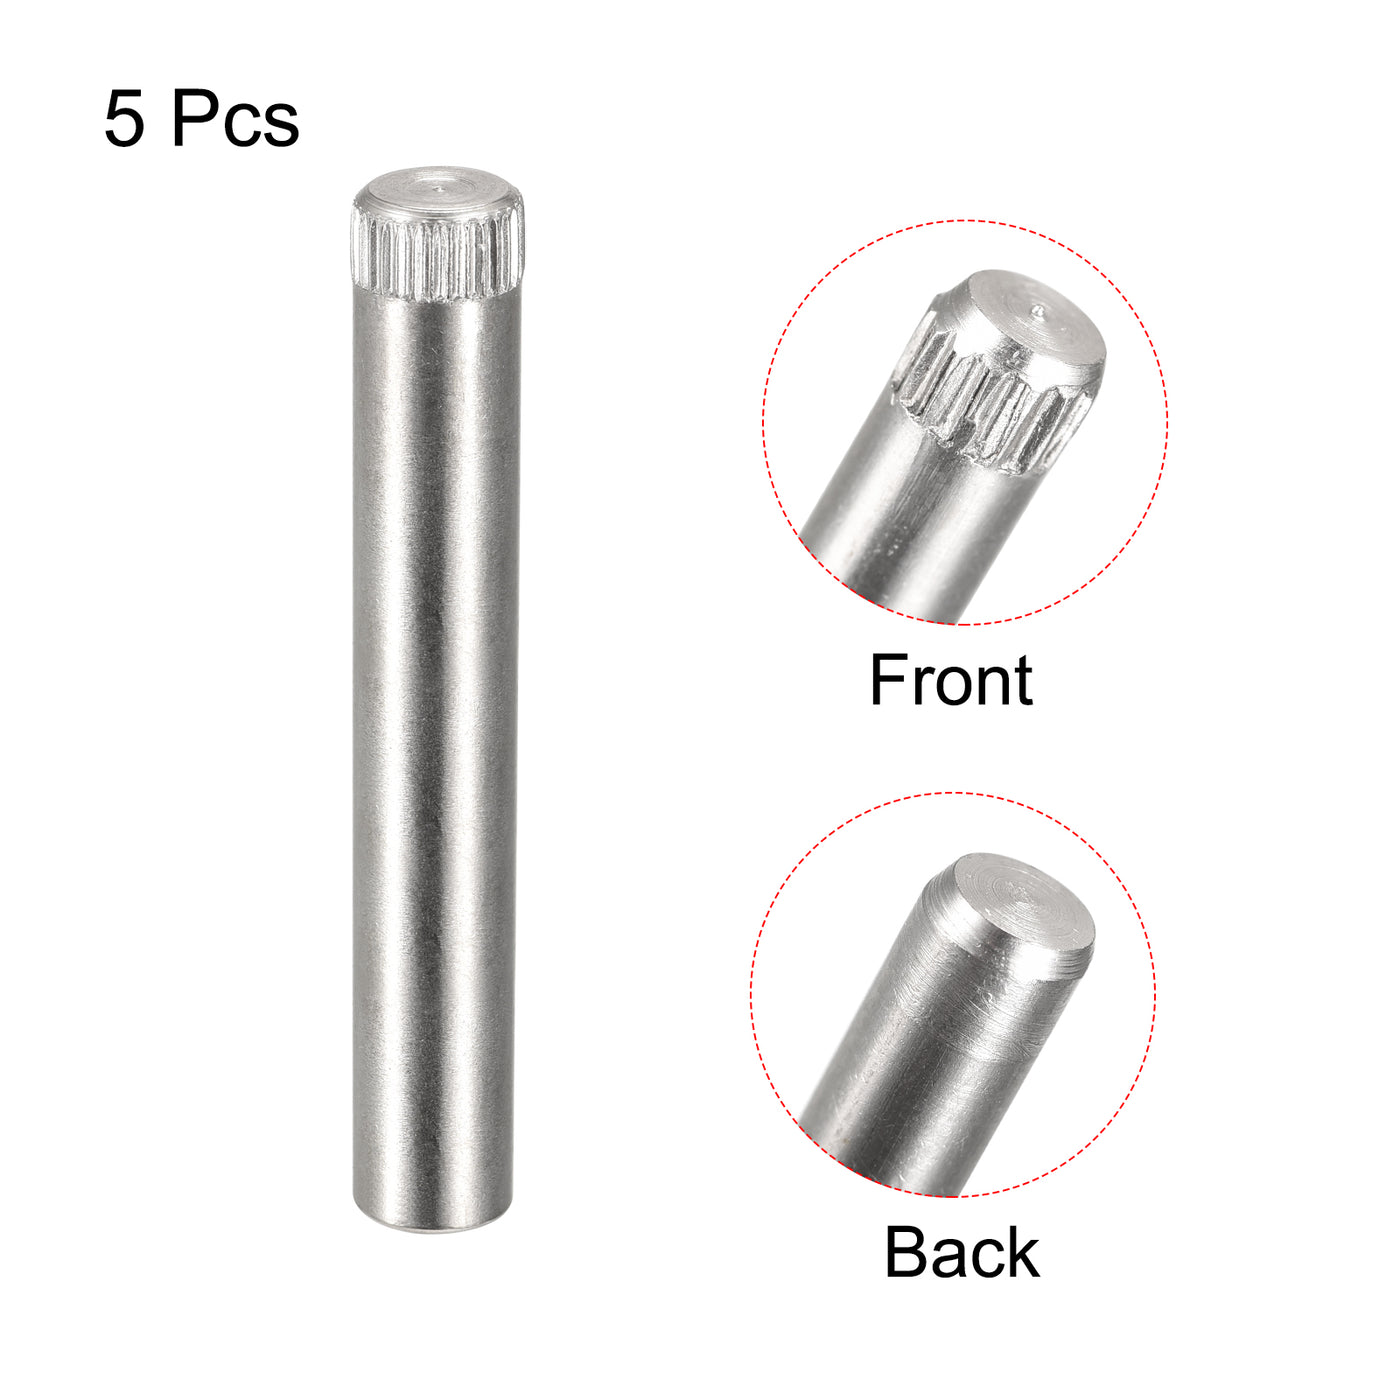 uxcell Uxcell 8x50mm 304 Stainless Steel Dowel Pins, 5Pcs Knurled Head Flat End Dowel Pin